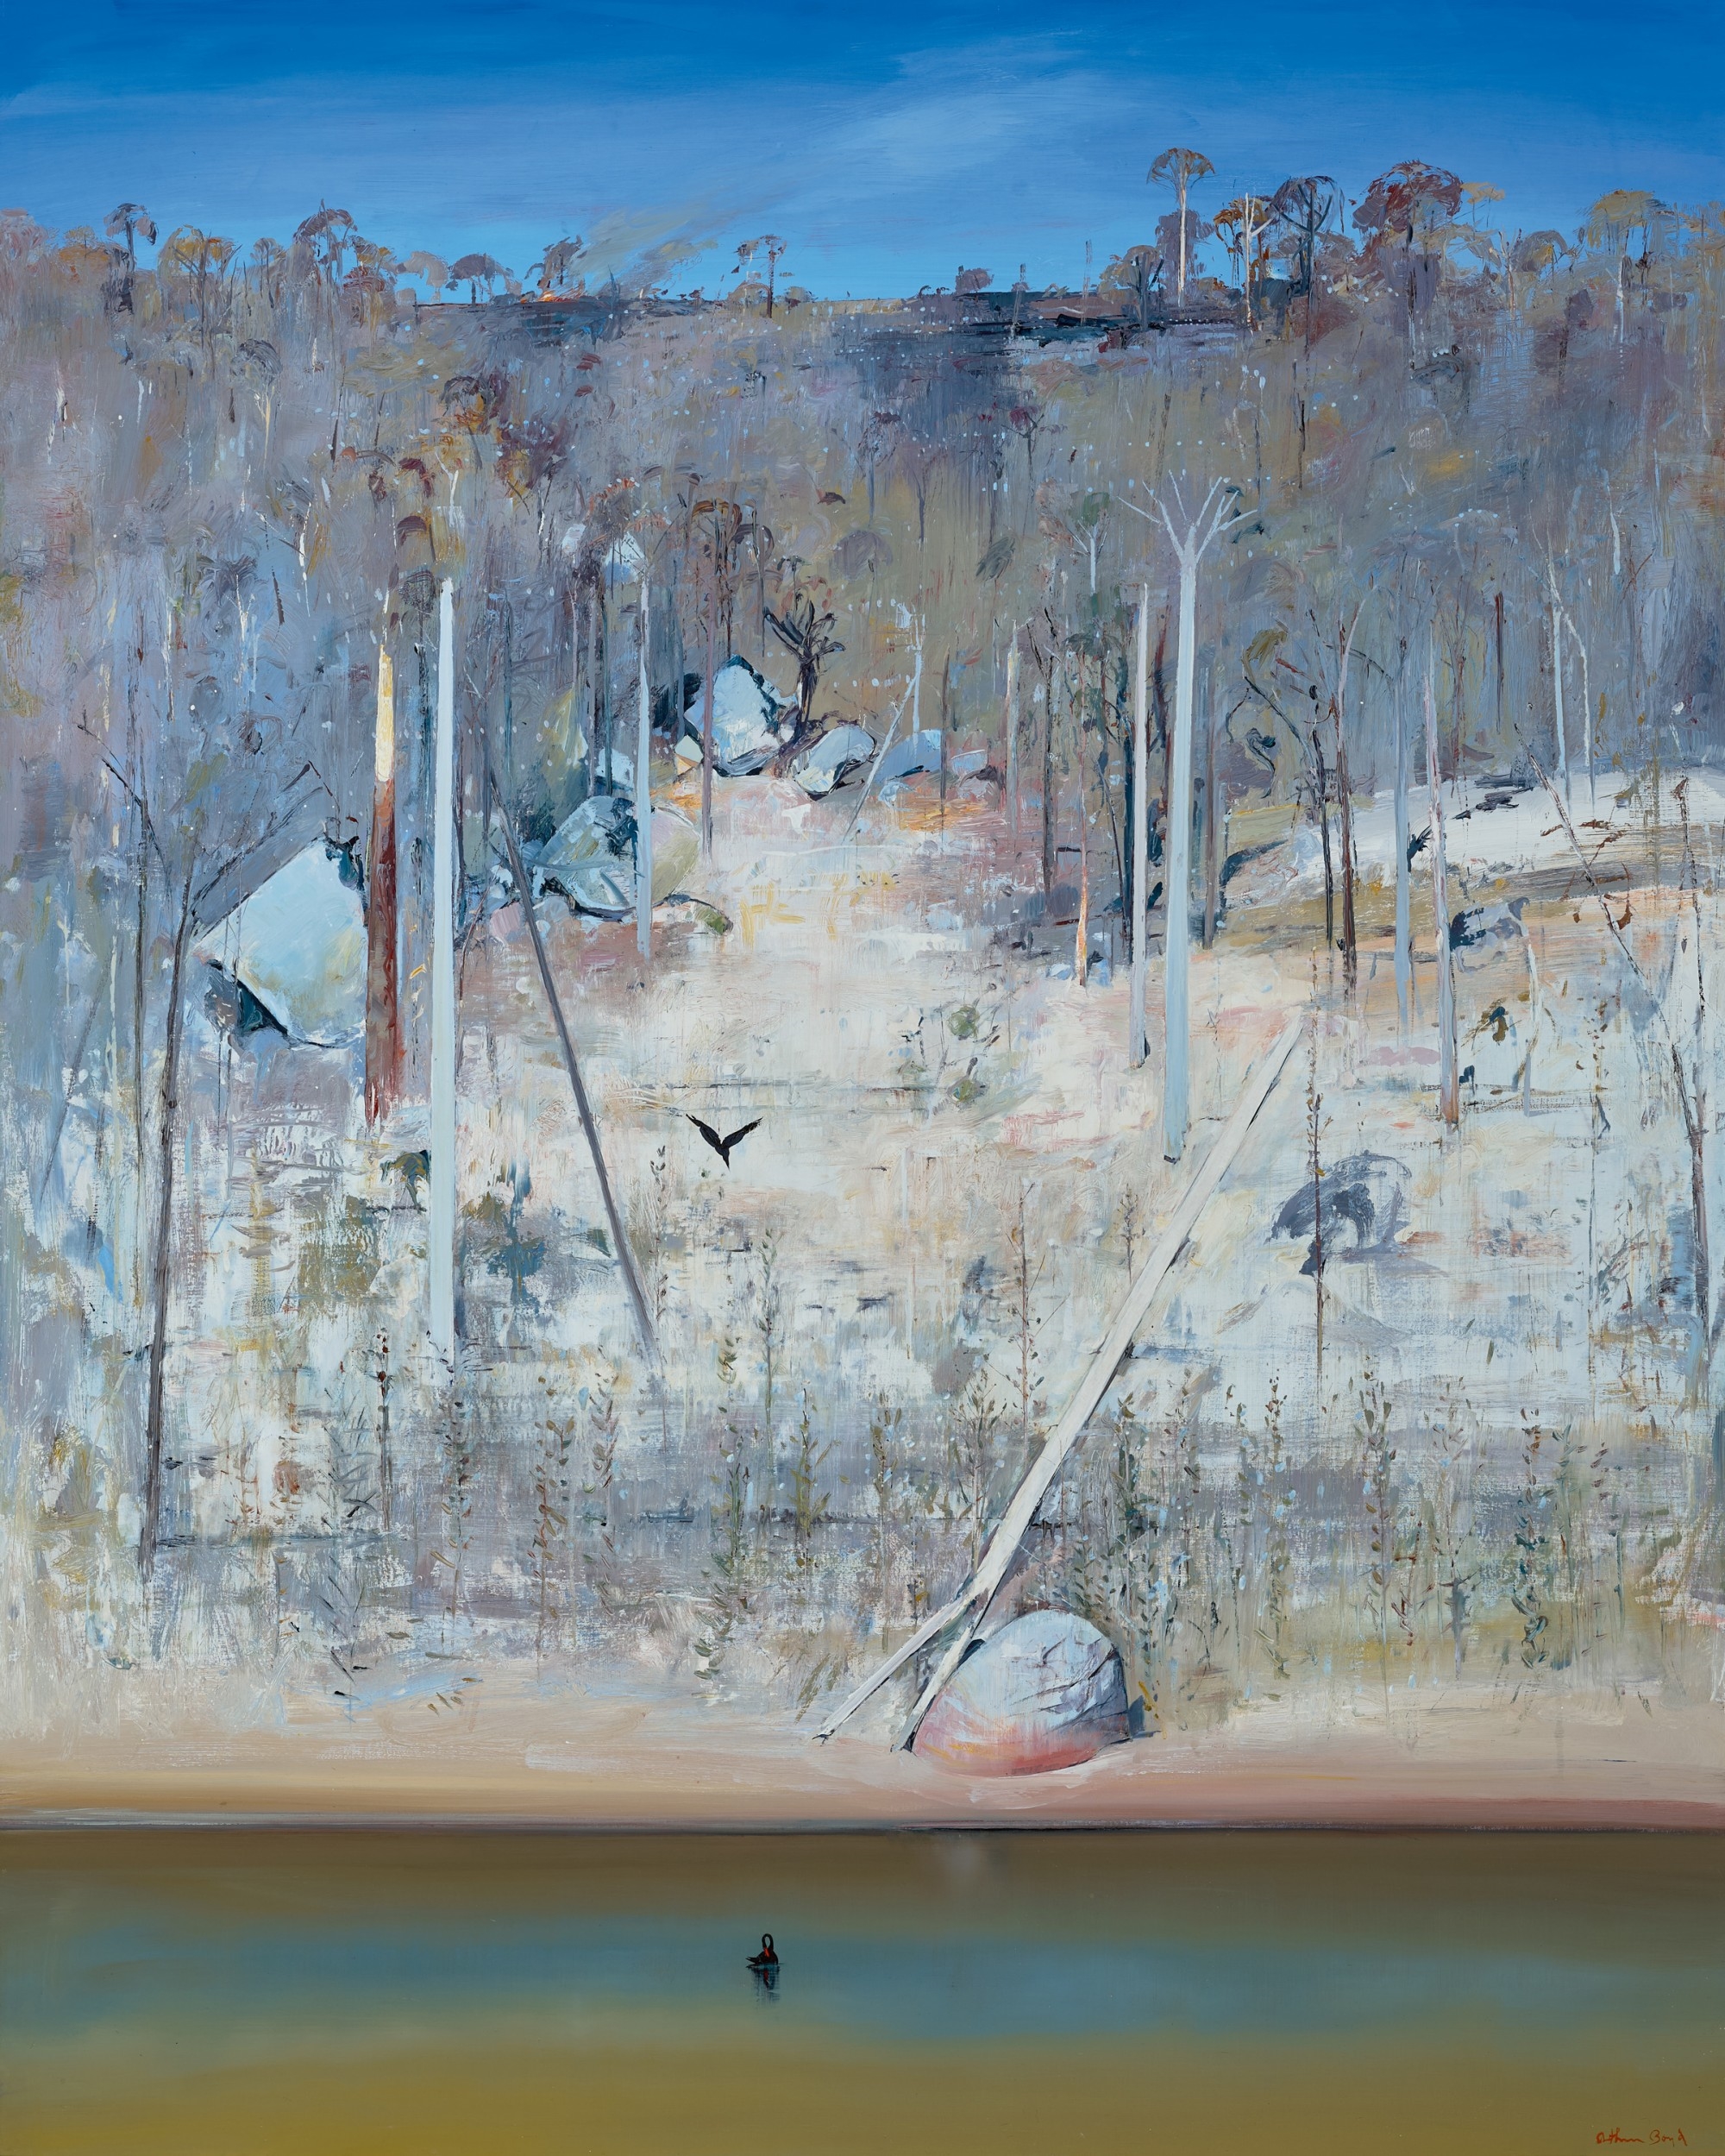 SHOALHAVEN RIVERBANKS AND LARGE STONES by Arthur Boyd, 1981